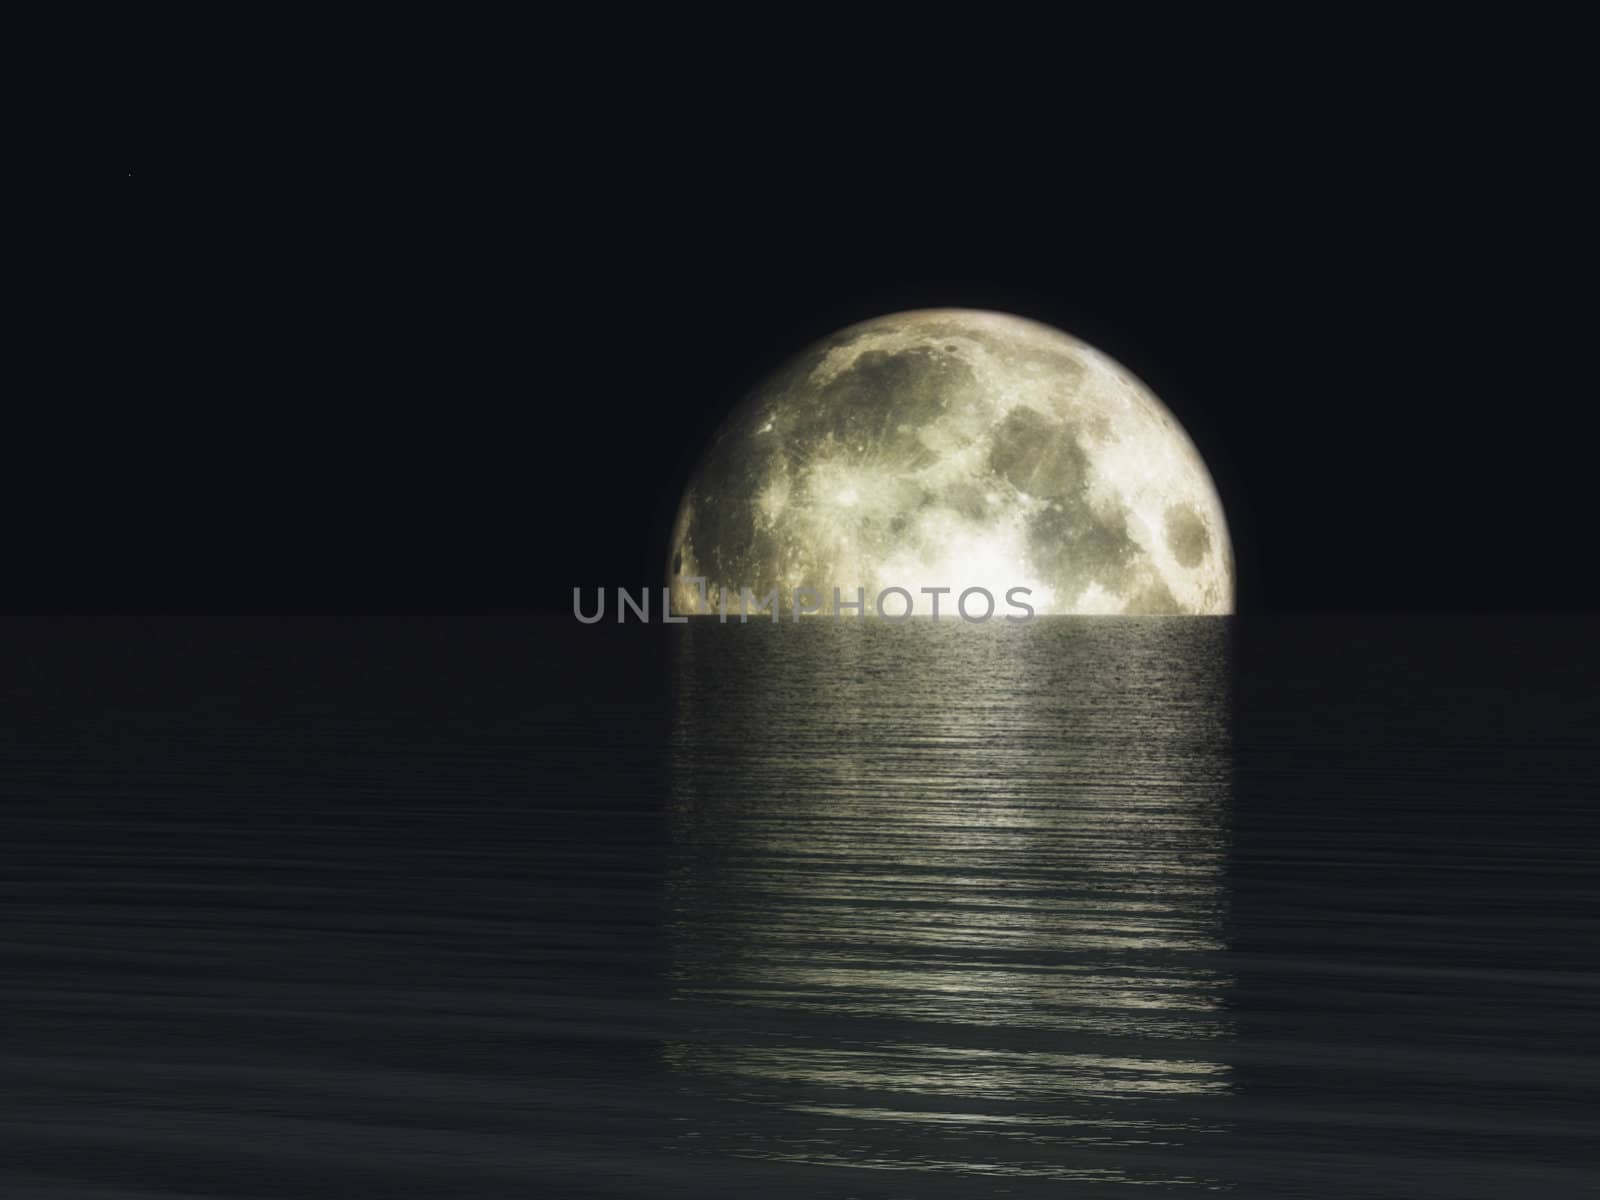 Digital Visualization of a Moonset by 3quarks